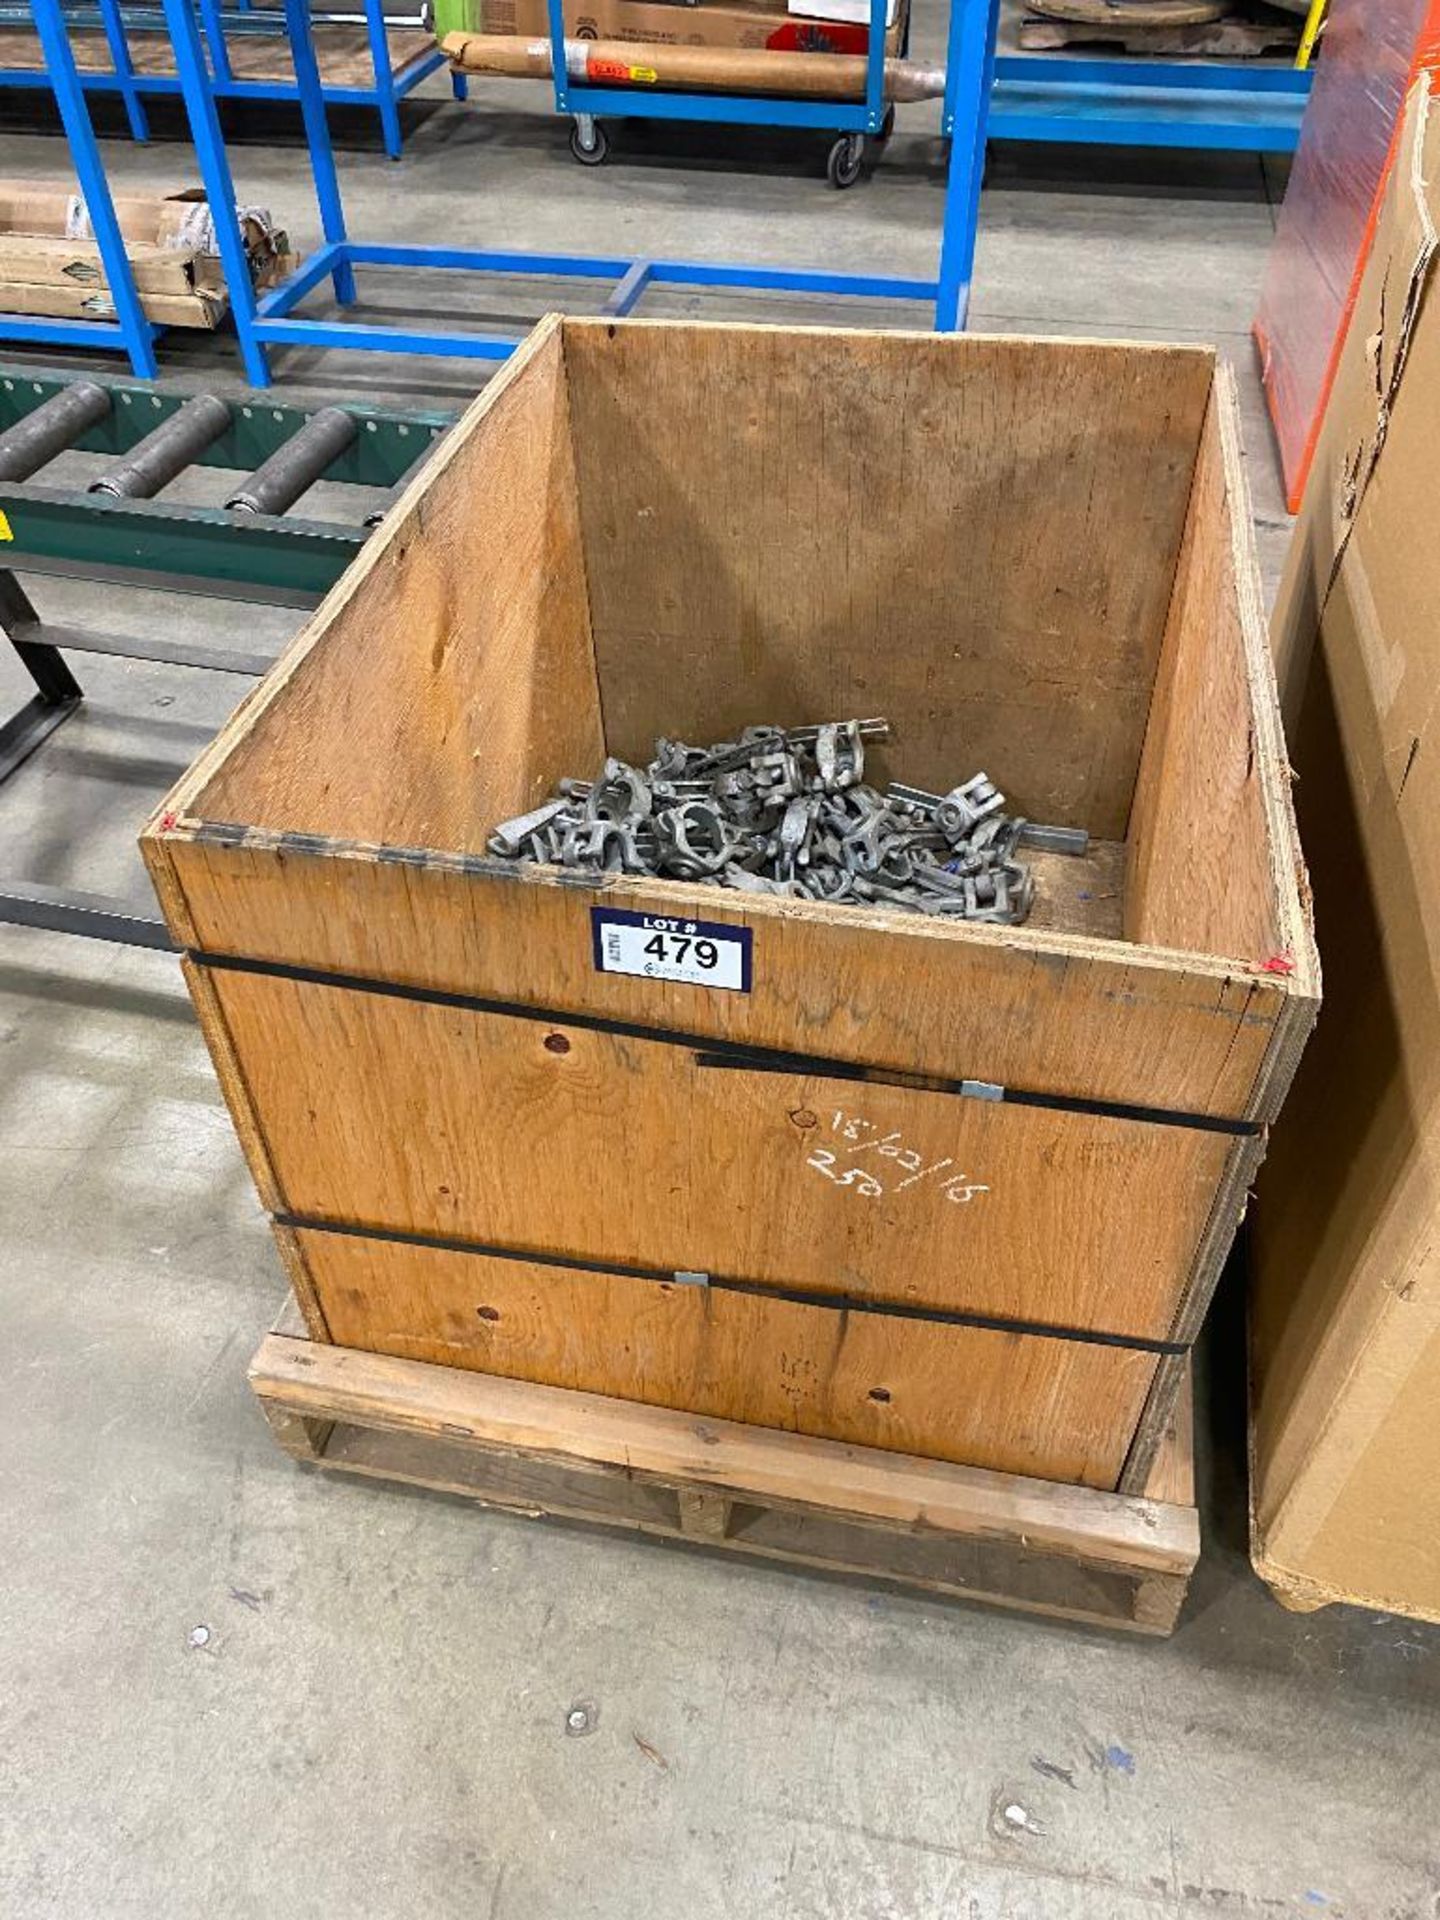 Crate of Asst. Scaffolding Clamps, etc. - Image 2 of 2